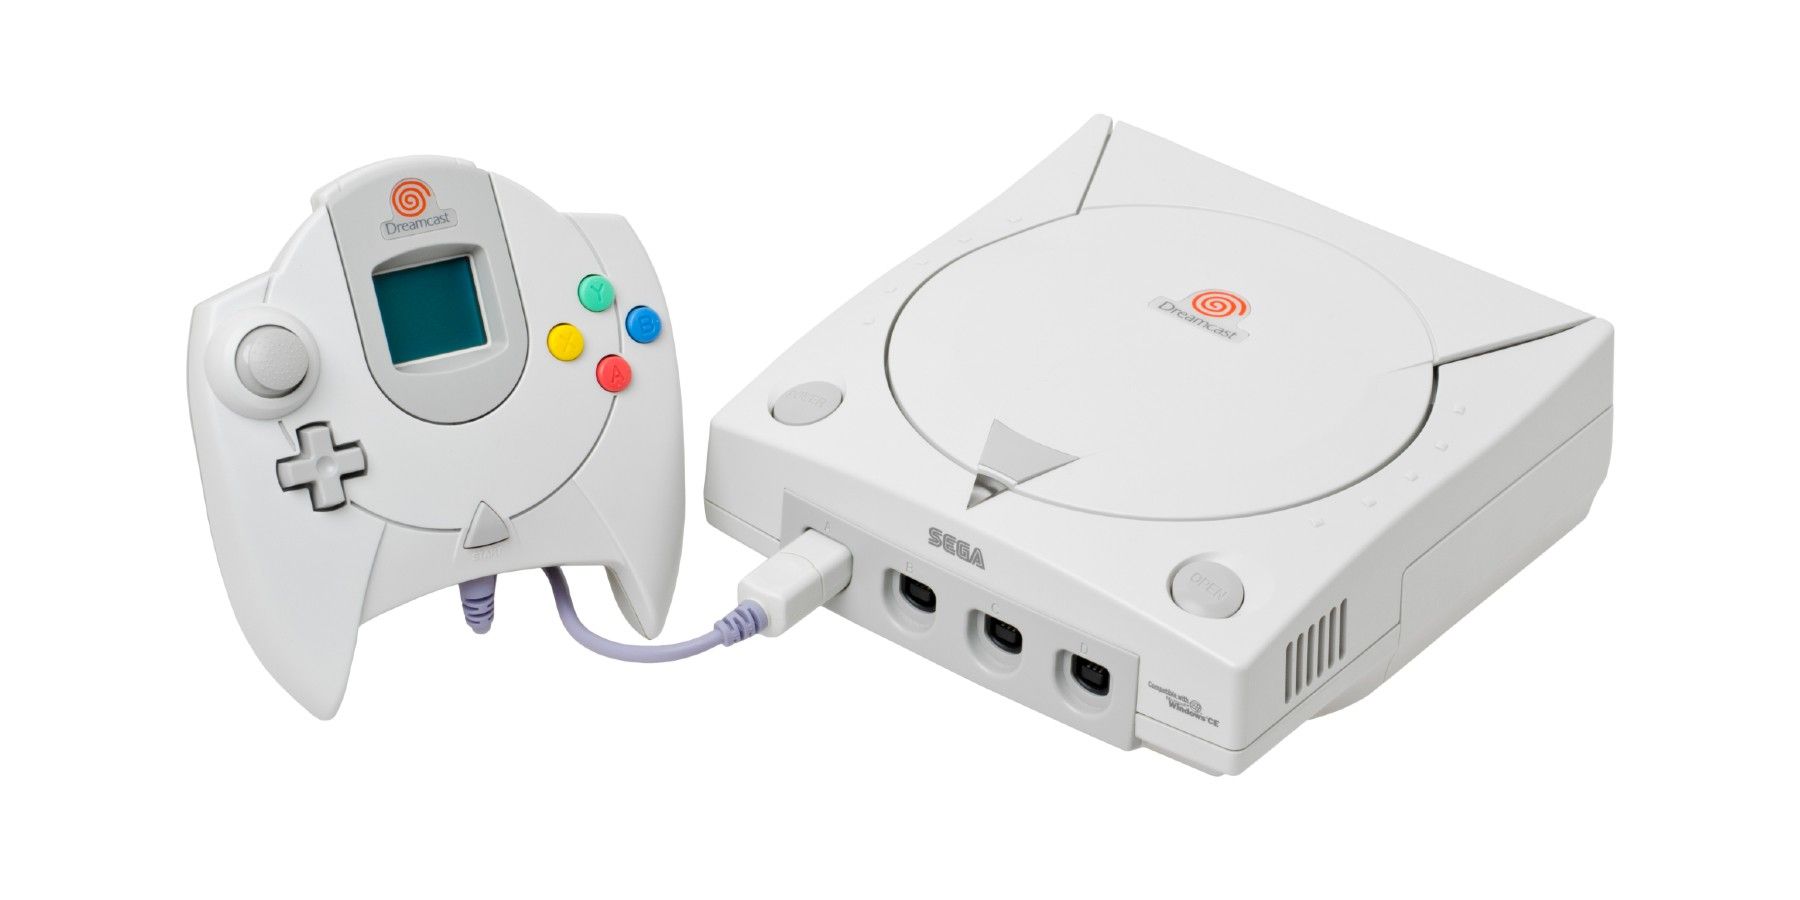 Dreamcast Exclusive is Making a Comeback After 24 Years